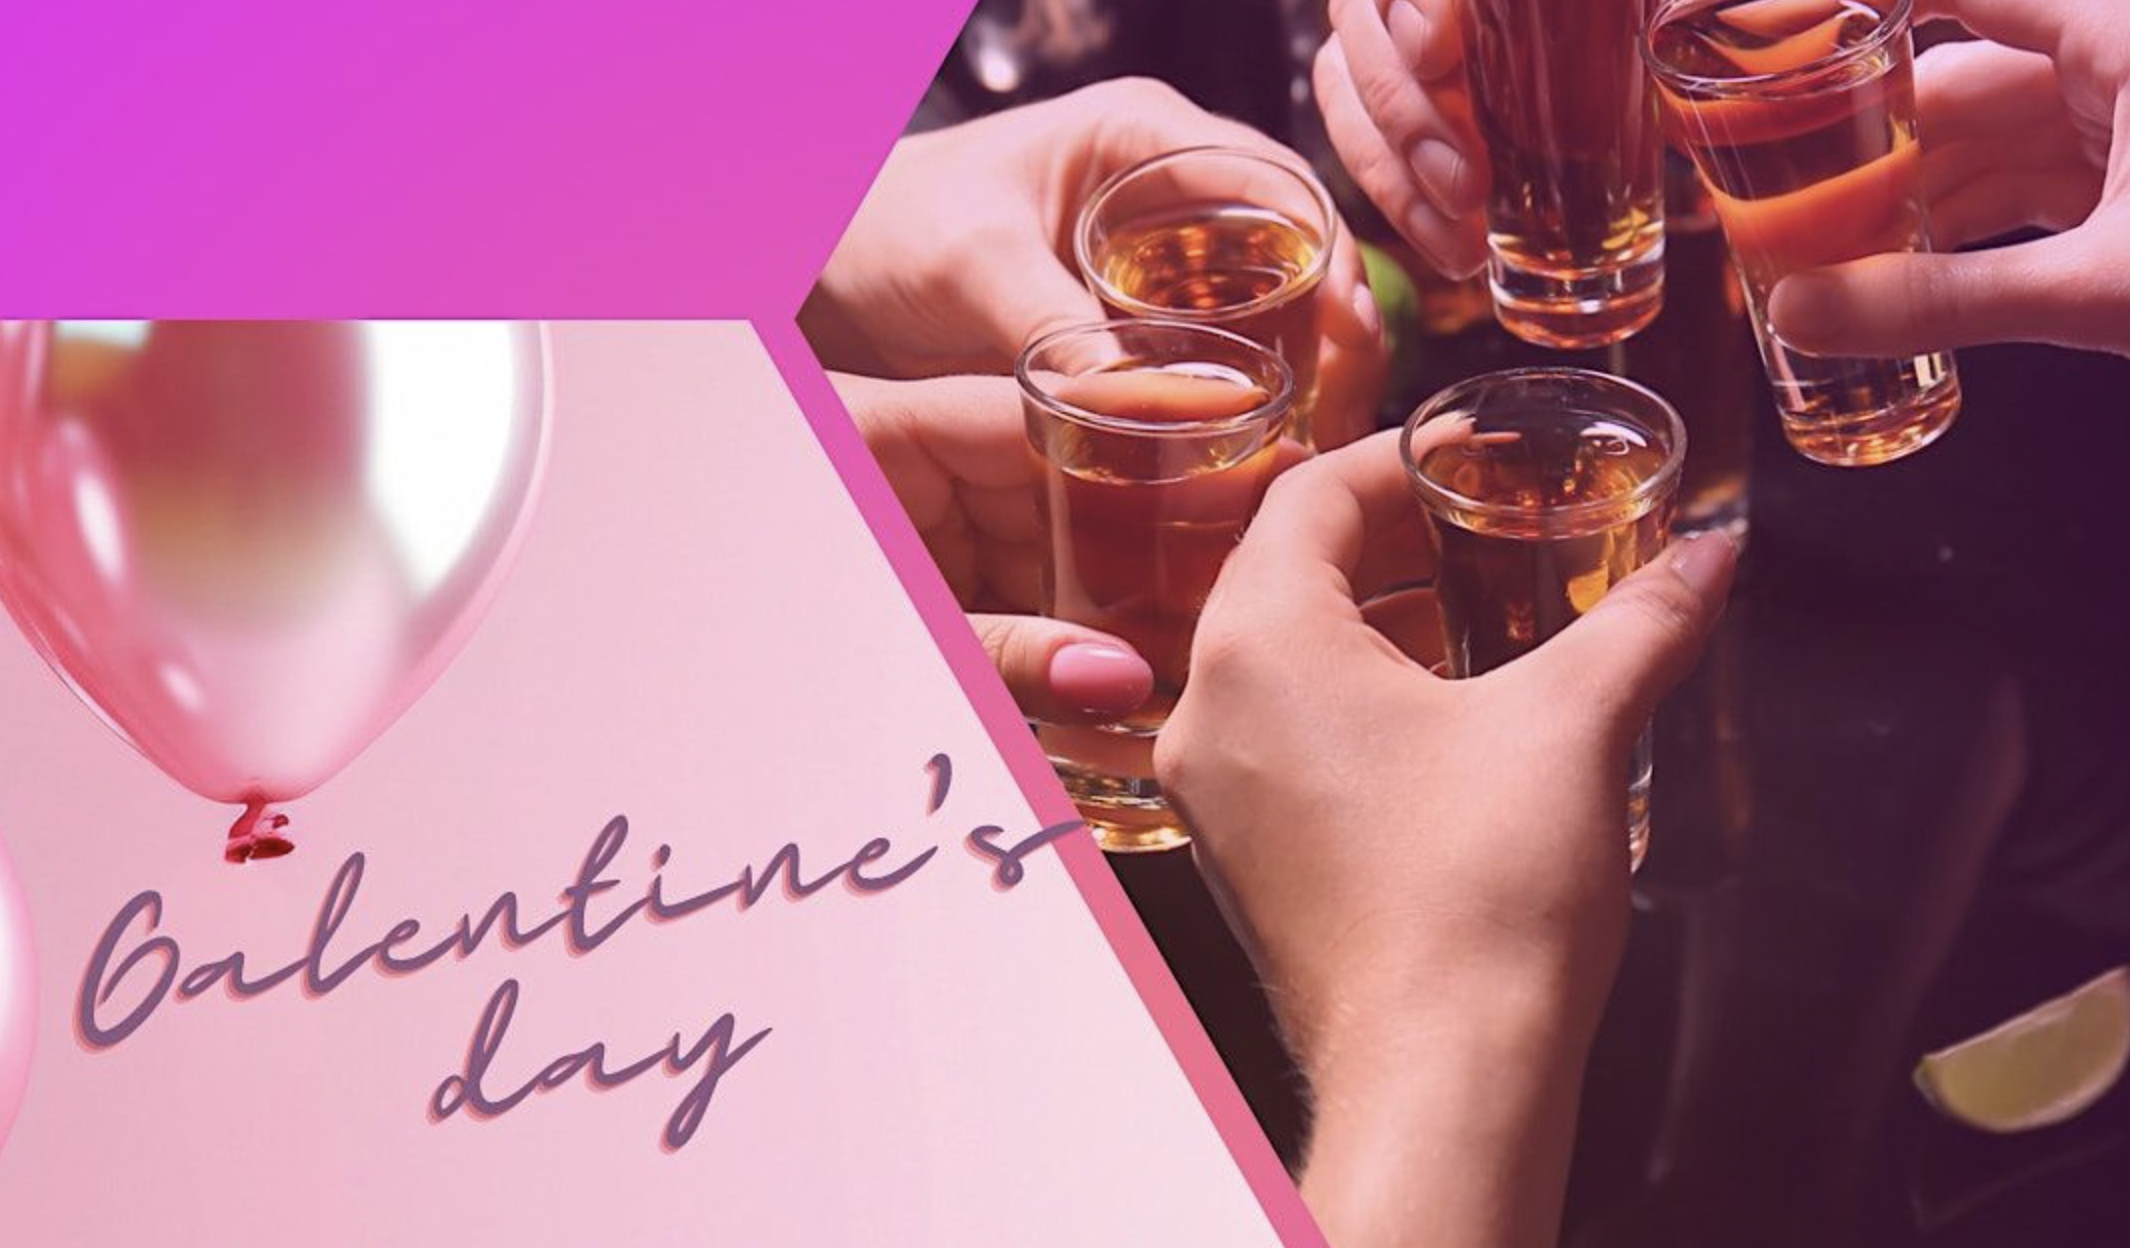 A collage that shows women cheering with shots of alcohol with the words "Galentine's Day" to the left